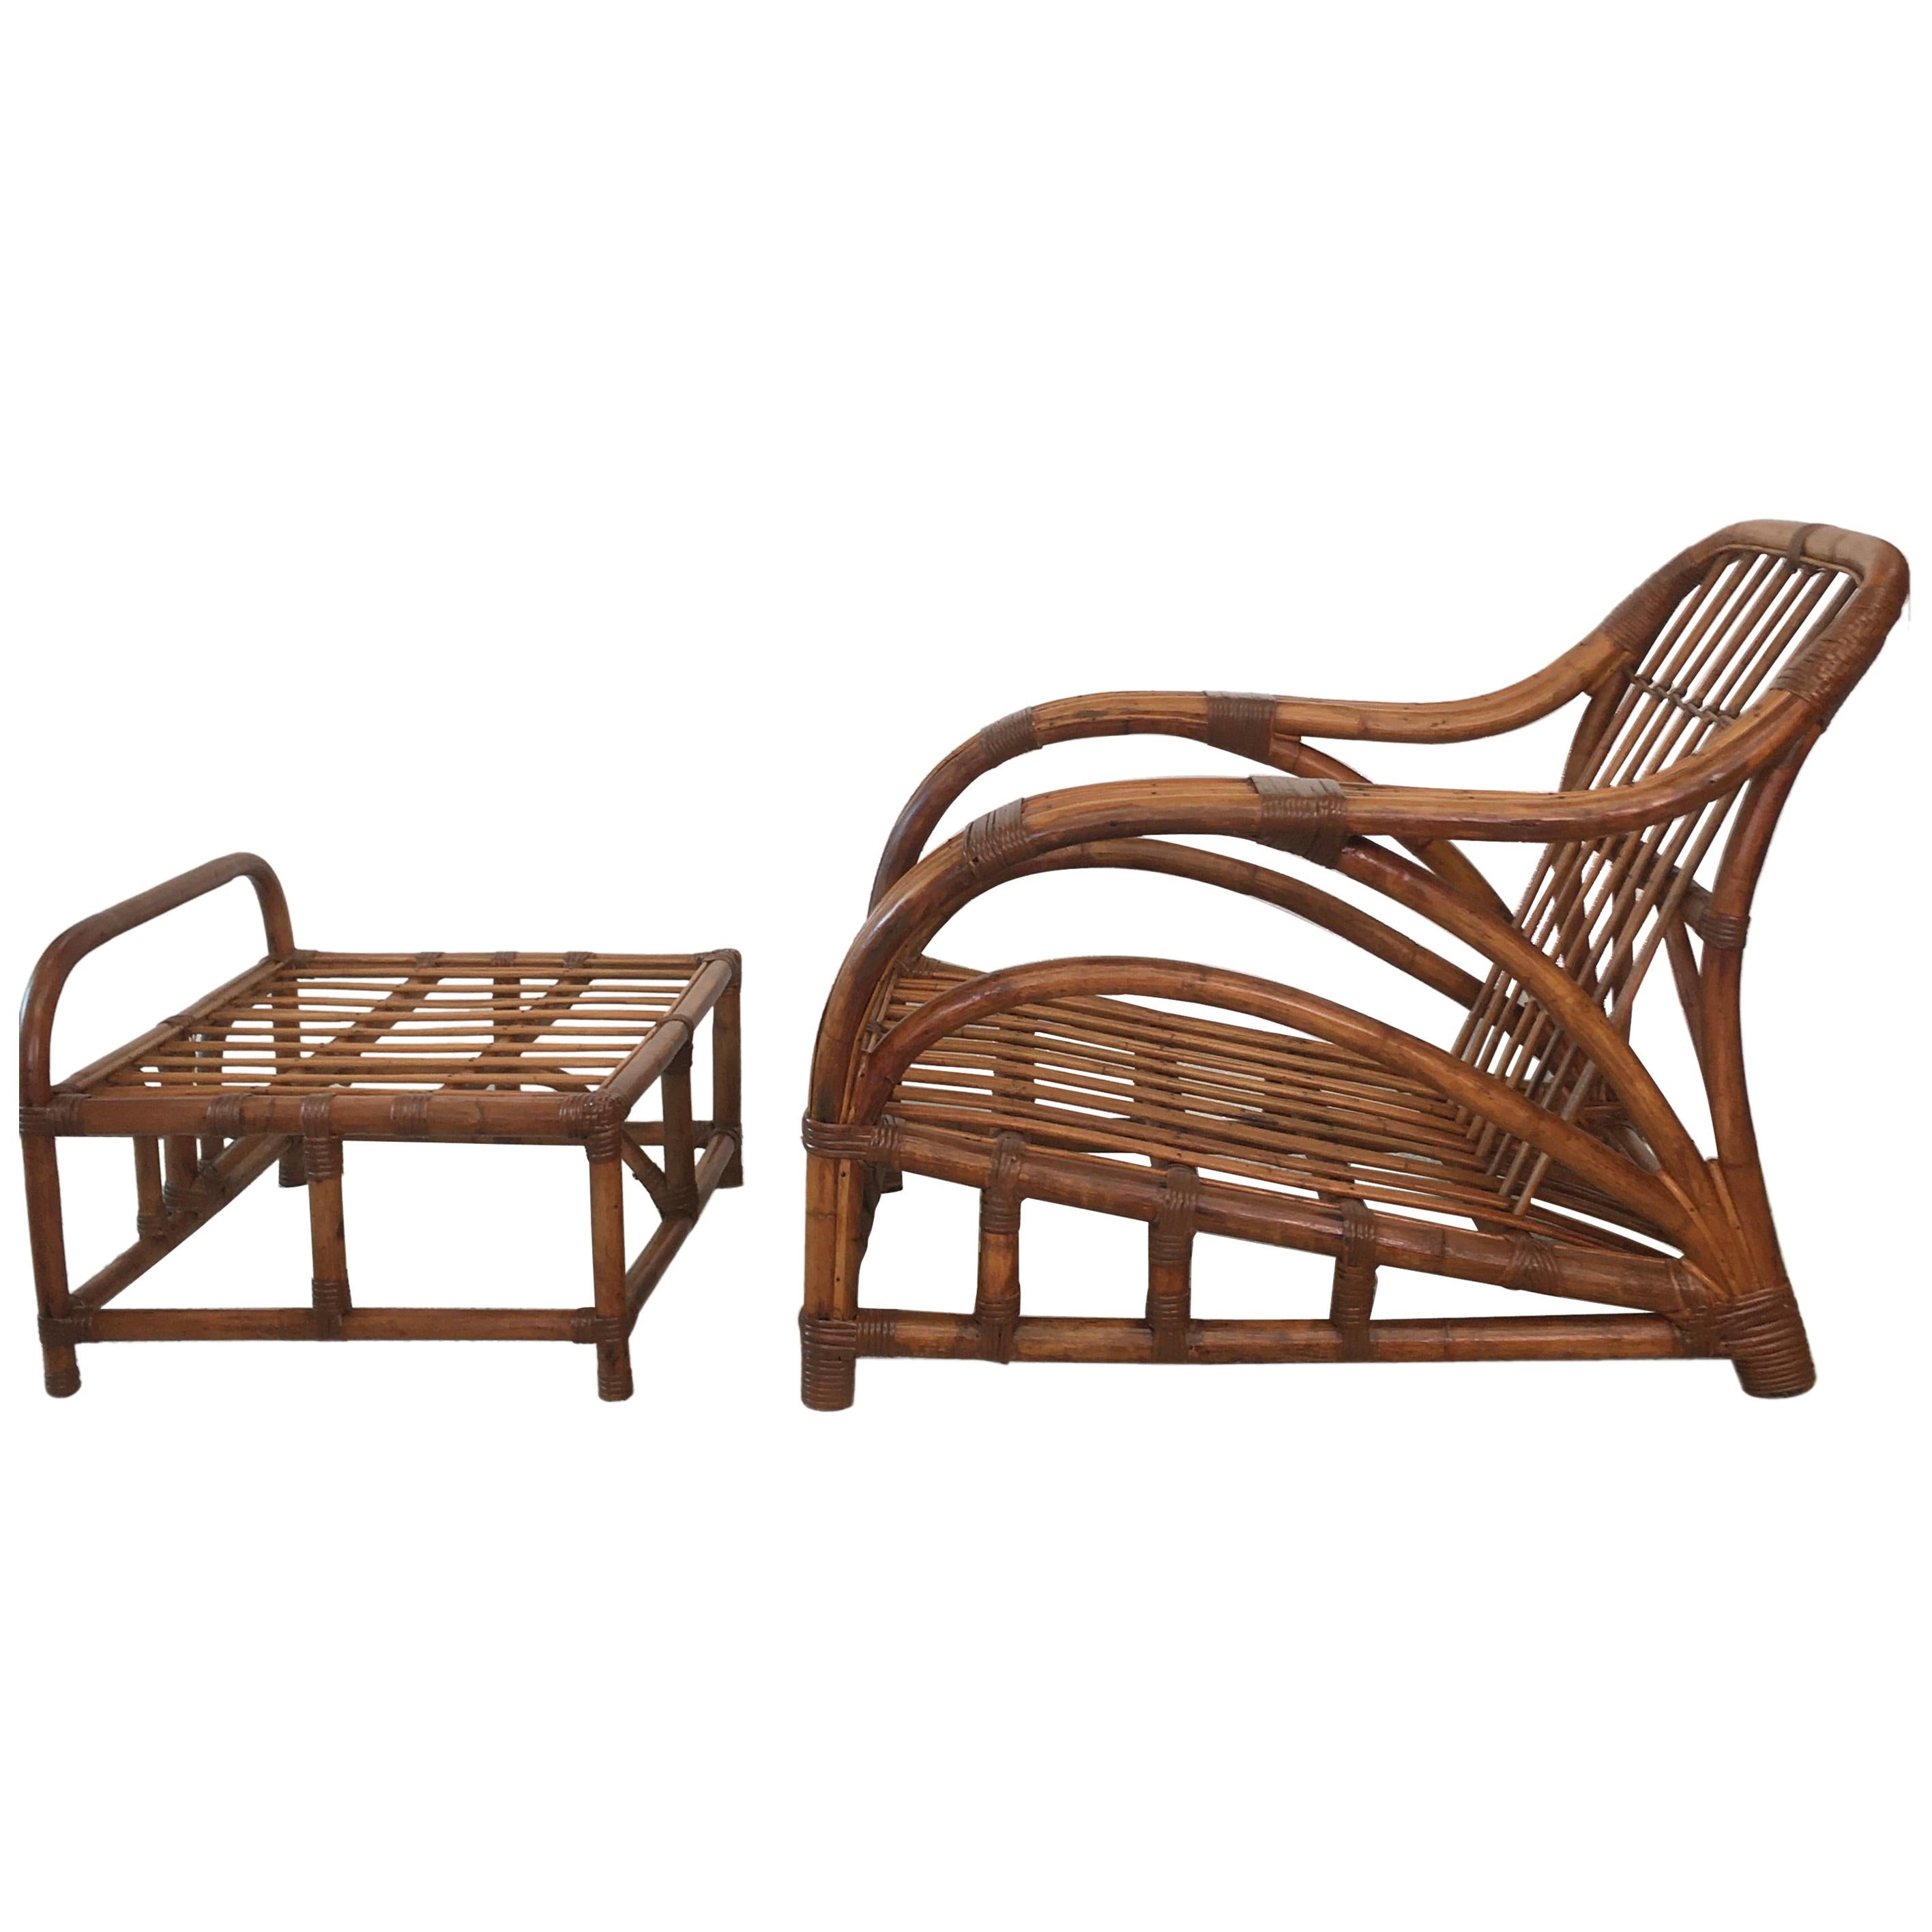 Art Deco Rattan Roadster Lounge Chair and Ottoman